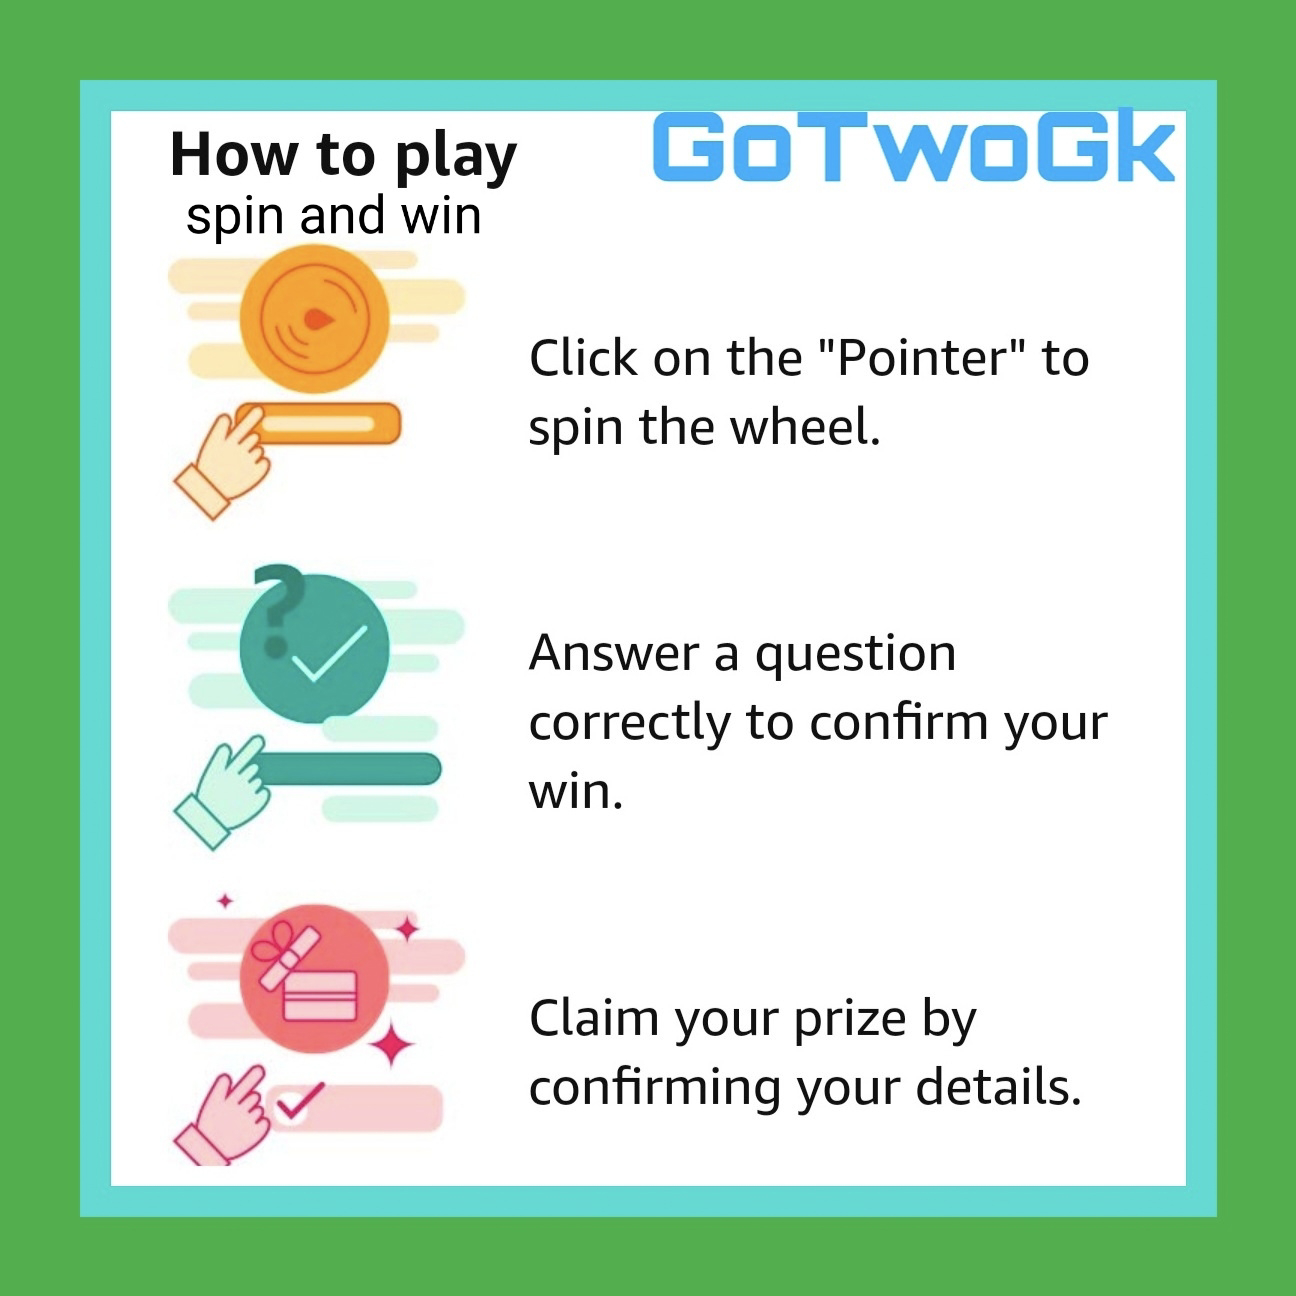 How to Play Spin and Win Contest